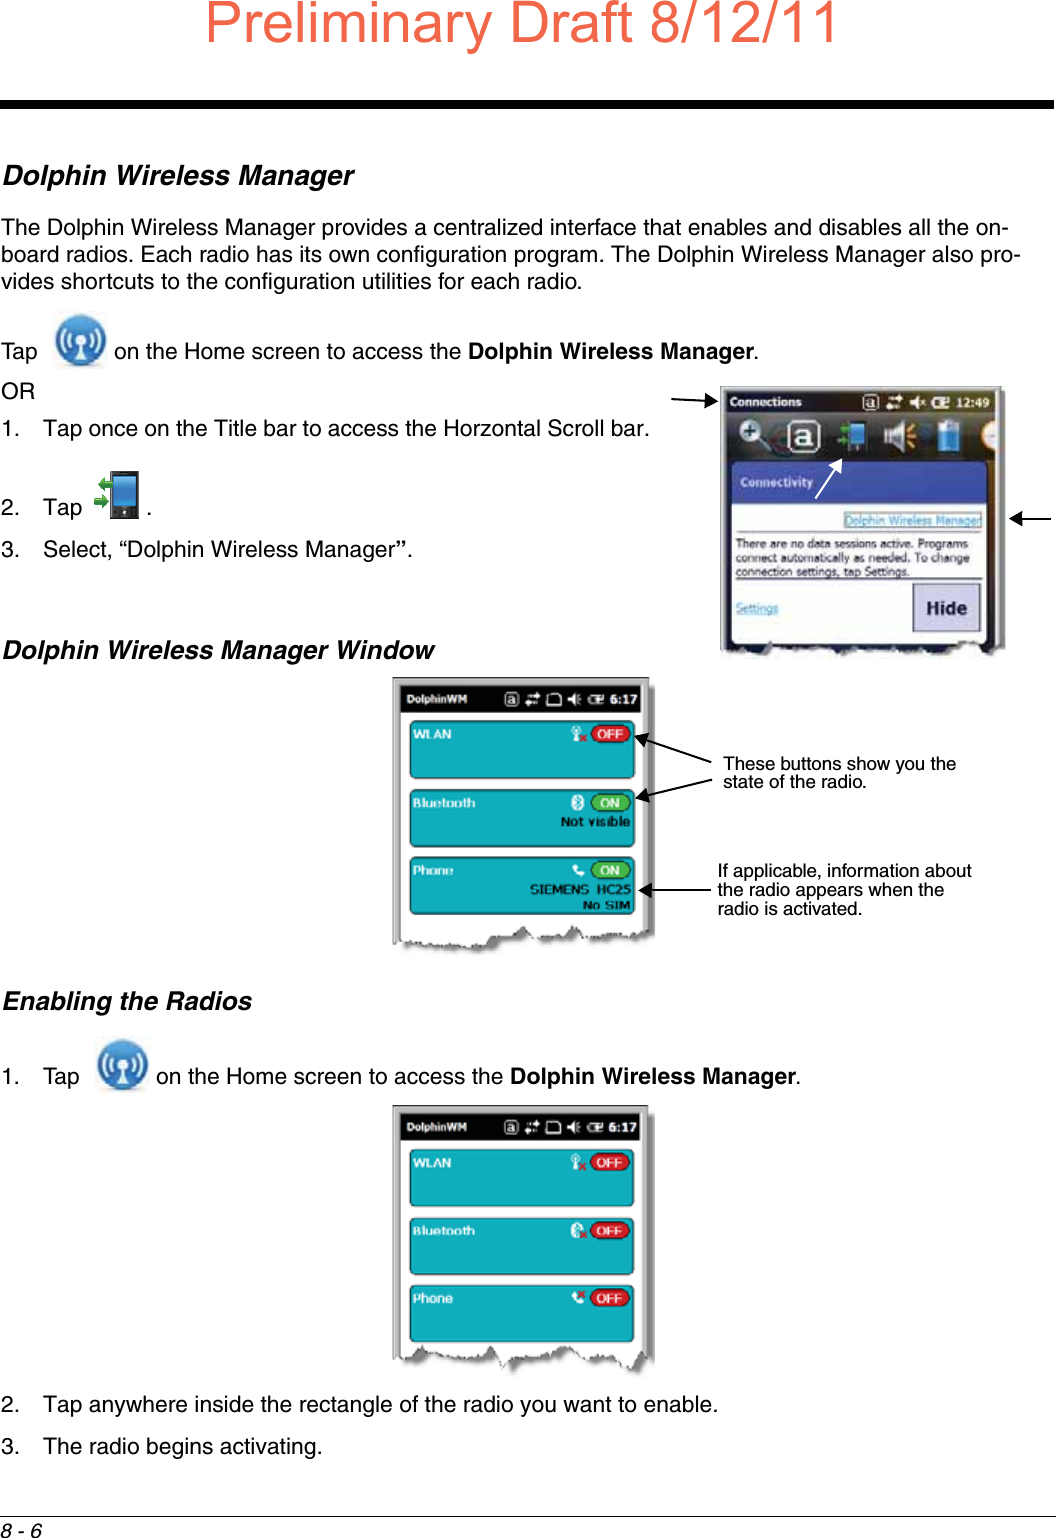 8 - 6Dolphin Wireless ManagerThe Dolphin Wireless Manager provides a centralized interface that enables and disables all the on-board radios. Each radio has its own configuration program. The Dolphin Wireless Manager also pro-vides shortcuts to the configuration utilities for each radio. Tap   on the Home screen to access the Dolphin Wireless Manager.OR 1. Tap once on the Title bar to access the Horzontal Scroll bar. 2. Tap . 3. Select, “Dolphin Wireless Manager”.Dolphin Wireless Manager WindowEnabling the Radios1. Tap   on the Home screen to access the Dolphin Wireless Manager.  2. Tap anywhere inside the rectangle of the radio you want to enable.3. The radio begins activating.If applicable, information about the radio appears when the radio is activated.These buttons show you the state of the radio.Preliminary Draft8/12/11Draft_99EX-UG_Rev-b-1.pdf   102 8/12/2011   4:13:51 PM